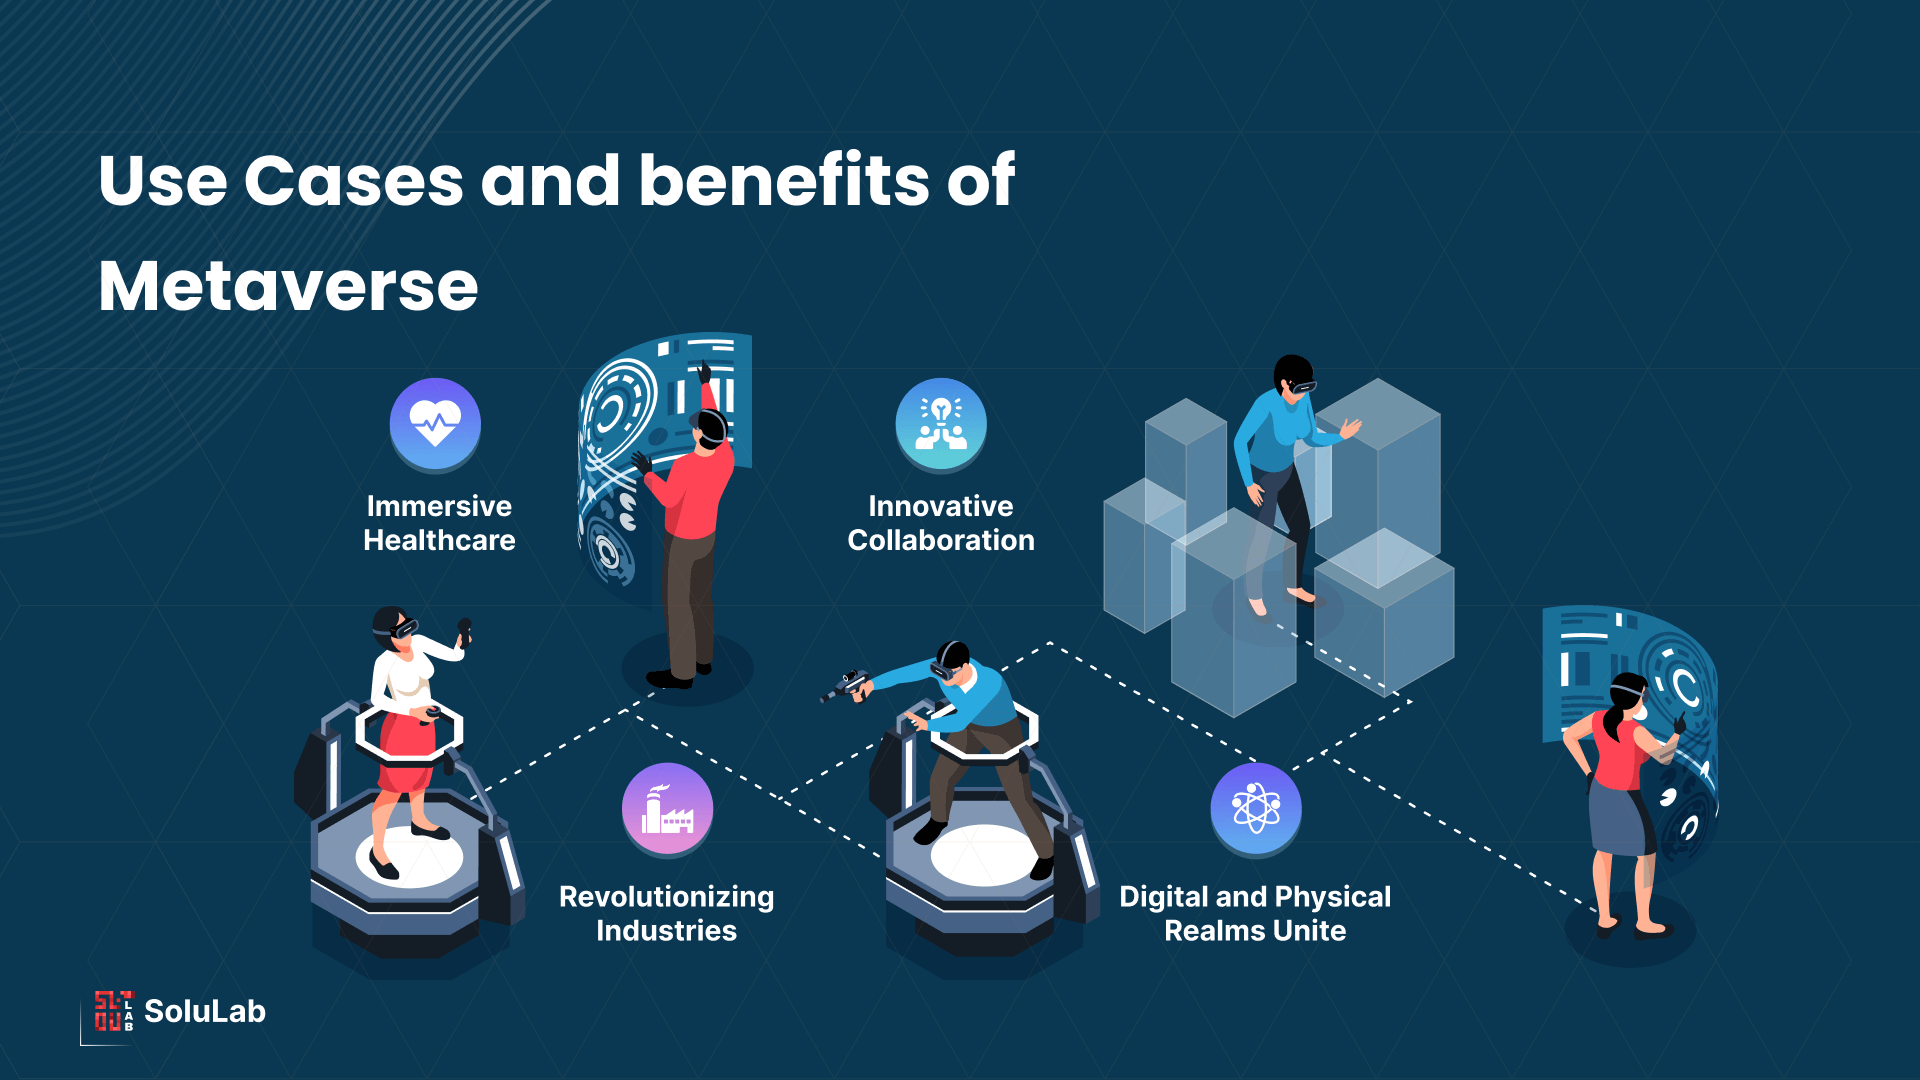 Use Cases and Benefits of Metaverse